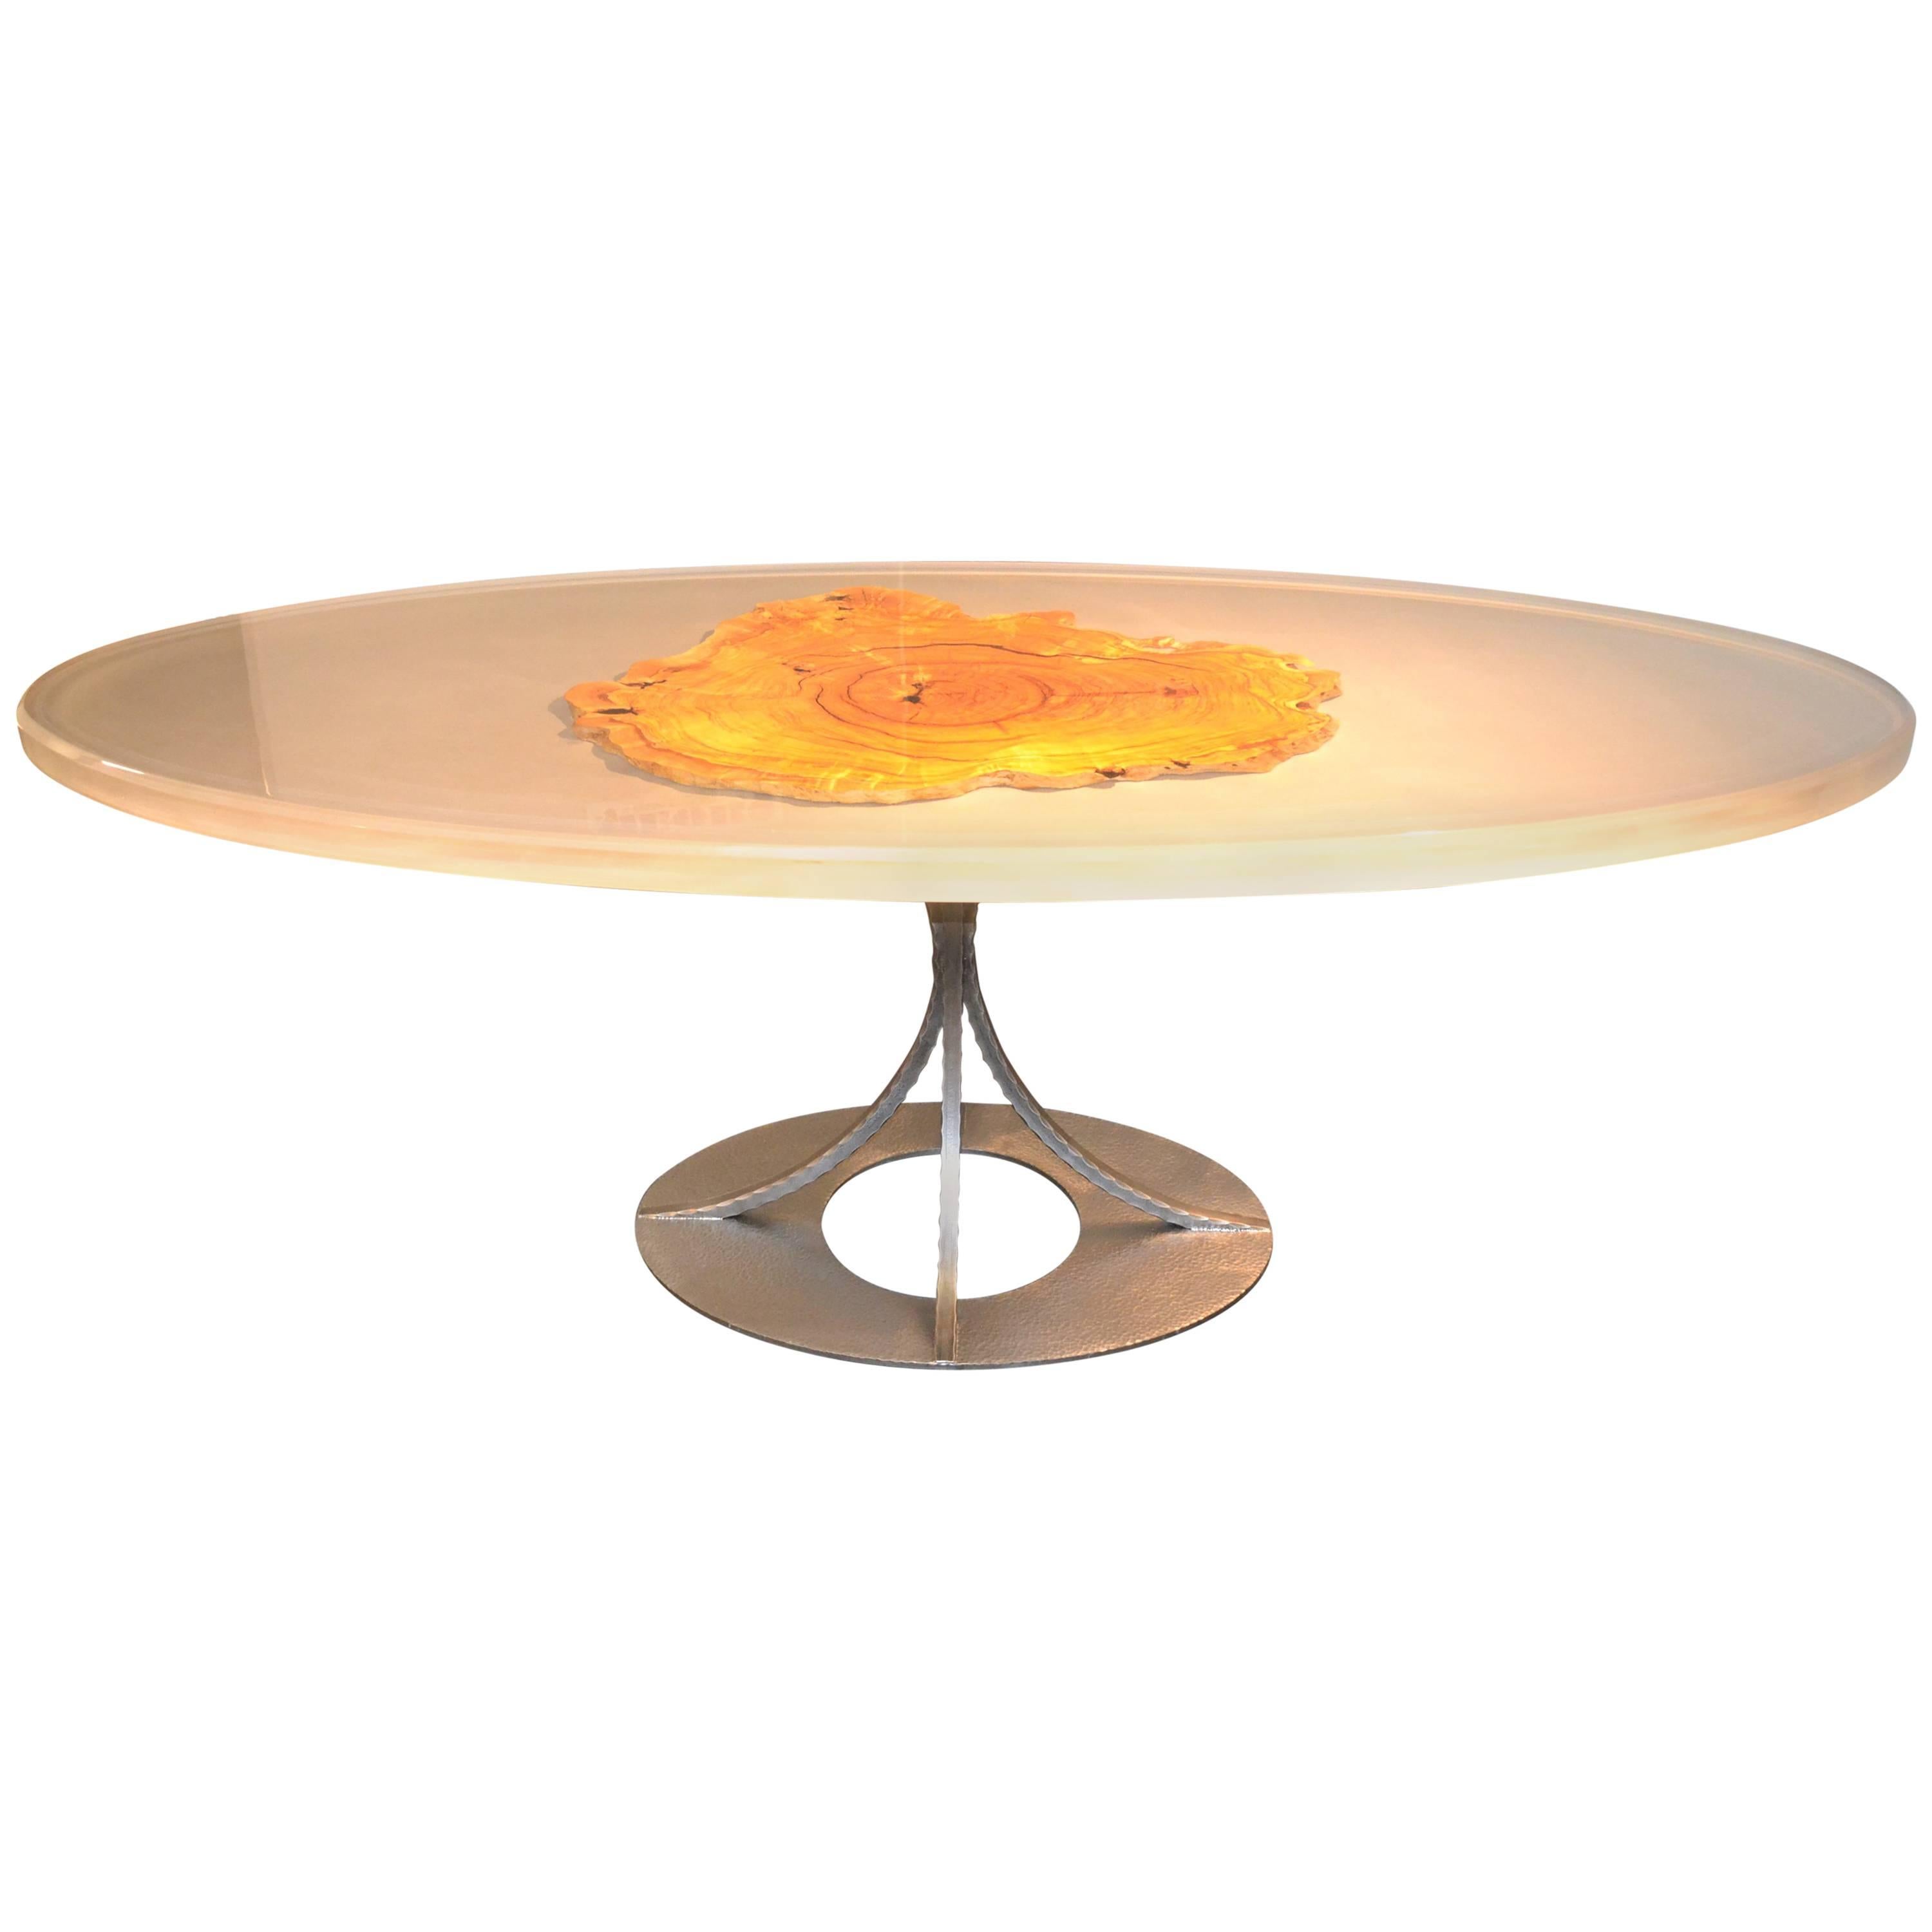 Contemporary Epoxy Resin Oval Dining Table with a Slice of Olive Tree Trunk For Sale